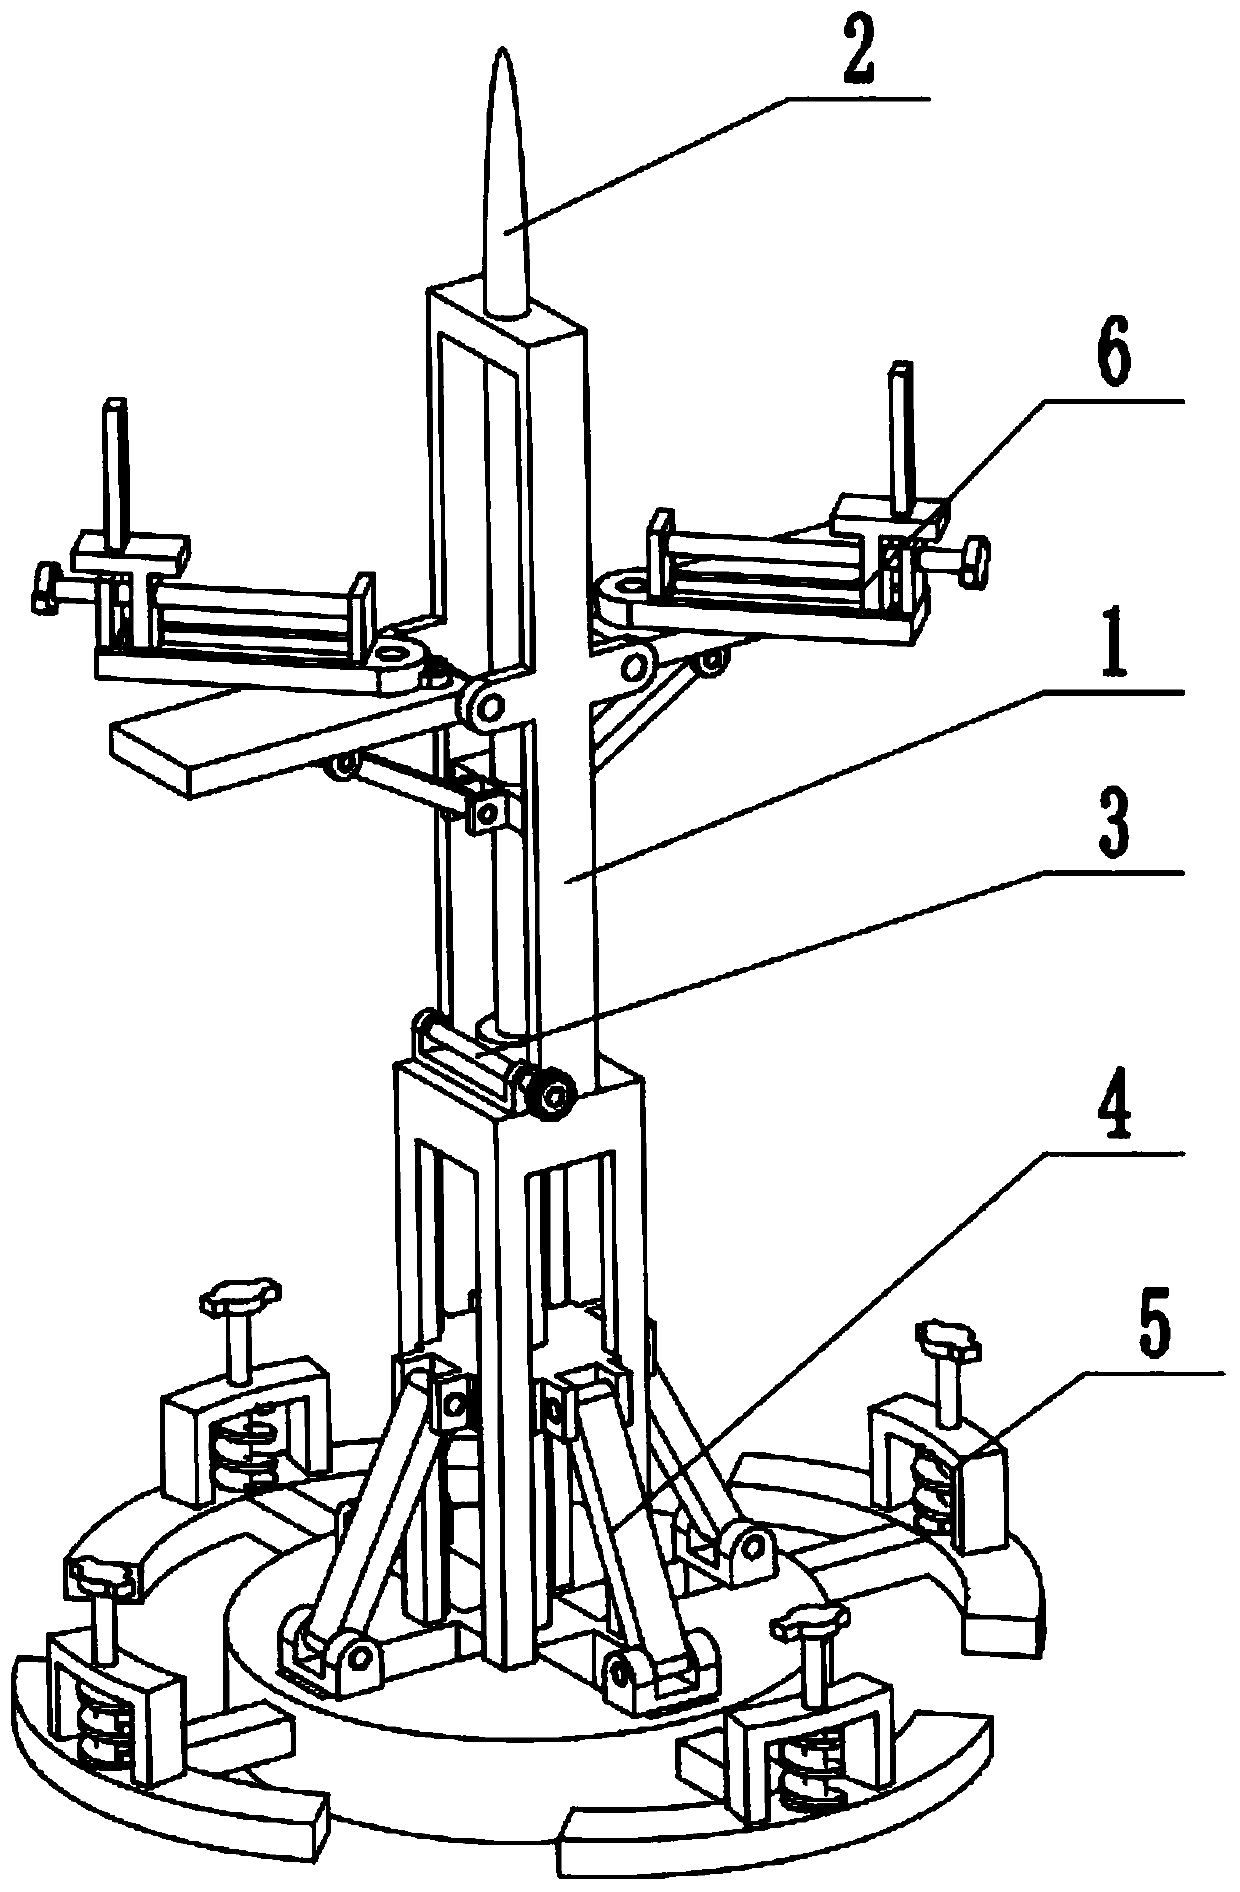 Small adjustable 5G signal receiving tower